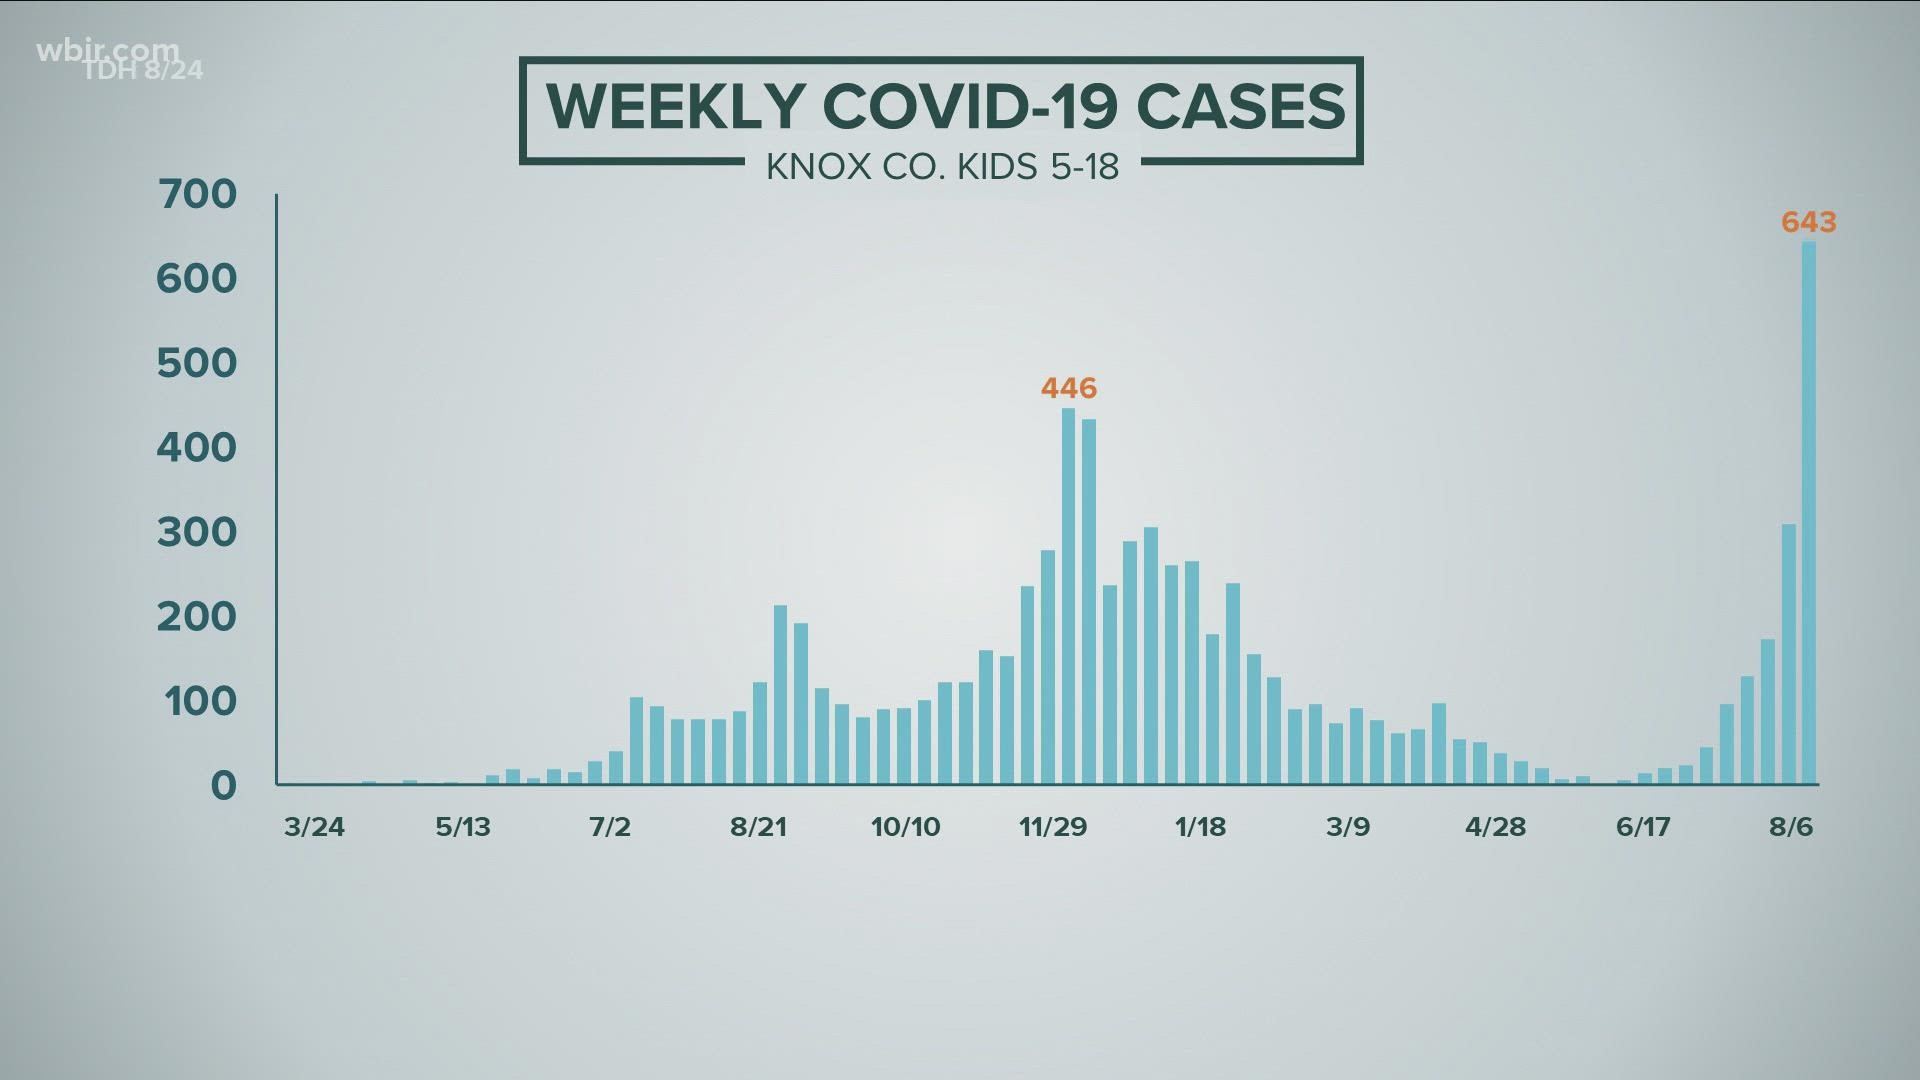 KCHD data shows the number of weekly COVID-19 cases in kids 5-18 has spiked to a new weekly high of 643 cases since returning to class.